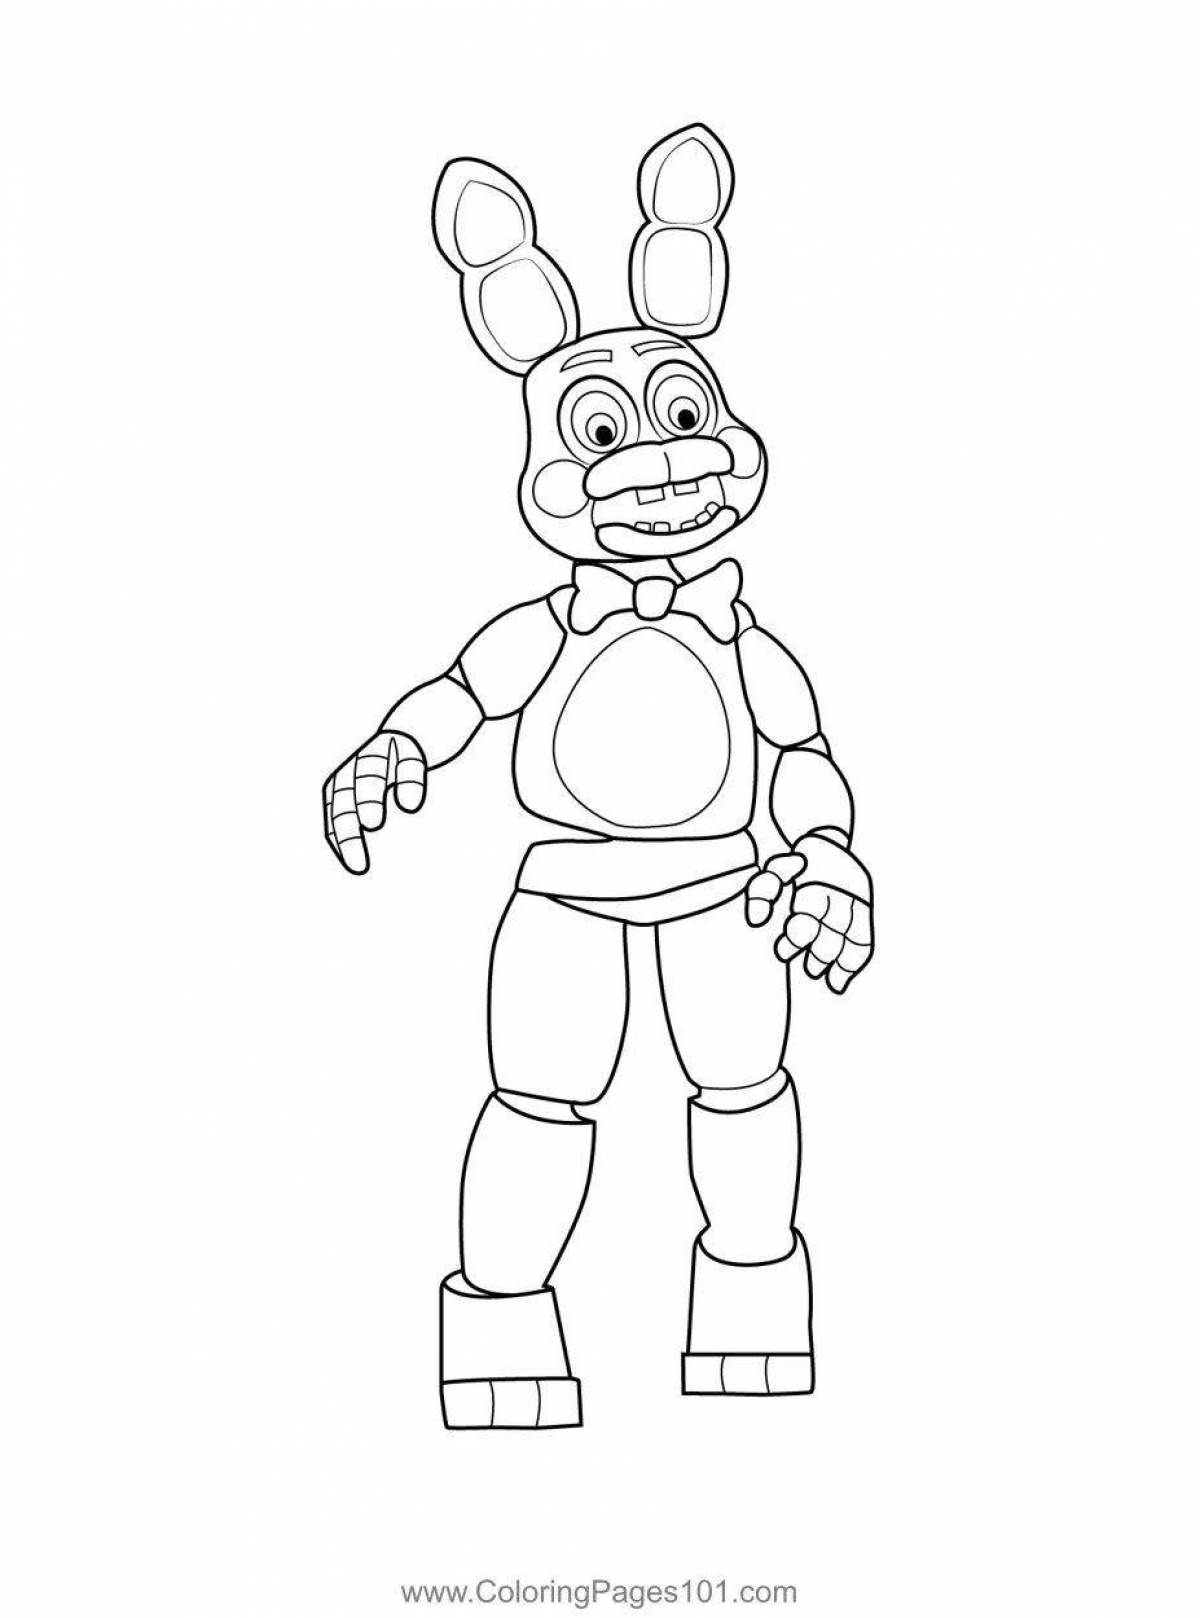 Adorable freddy robot coloring page